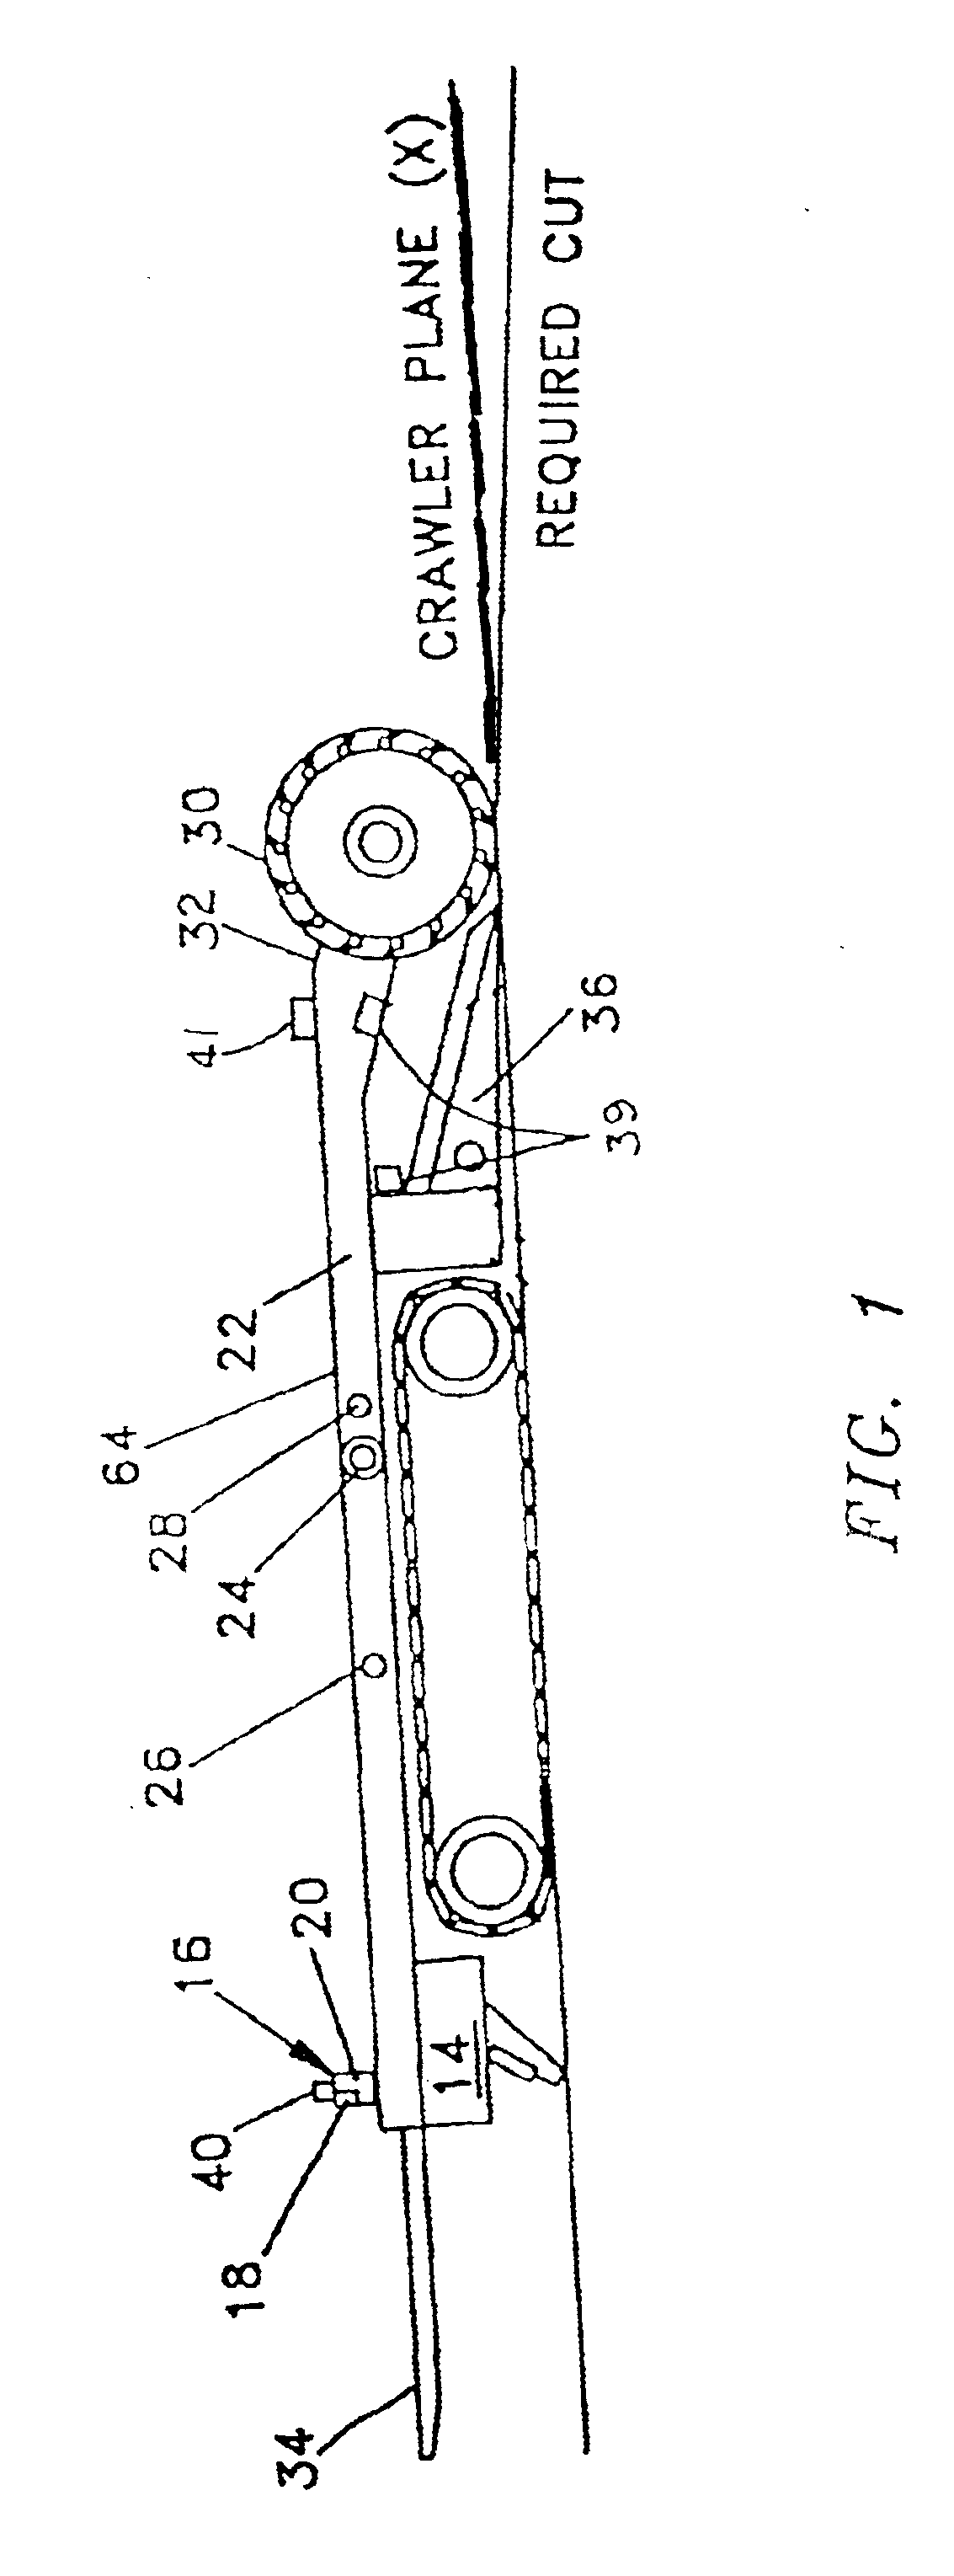 System for controlling cutting horizons for continuous type mining machines